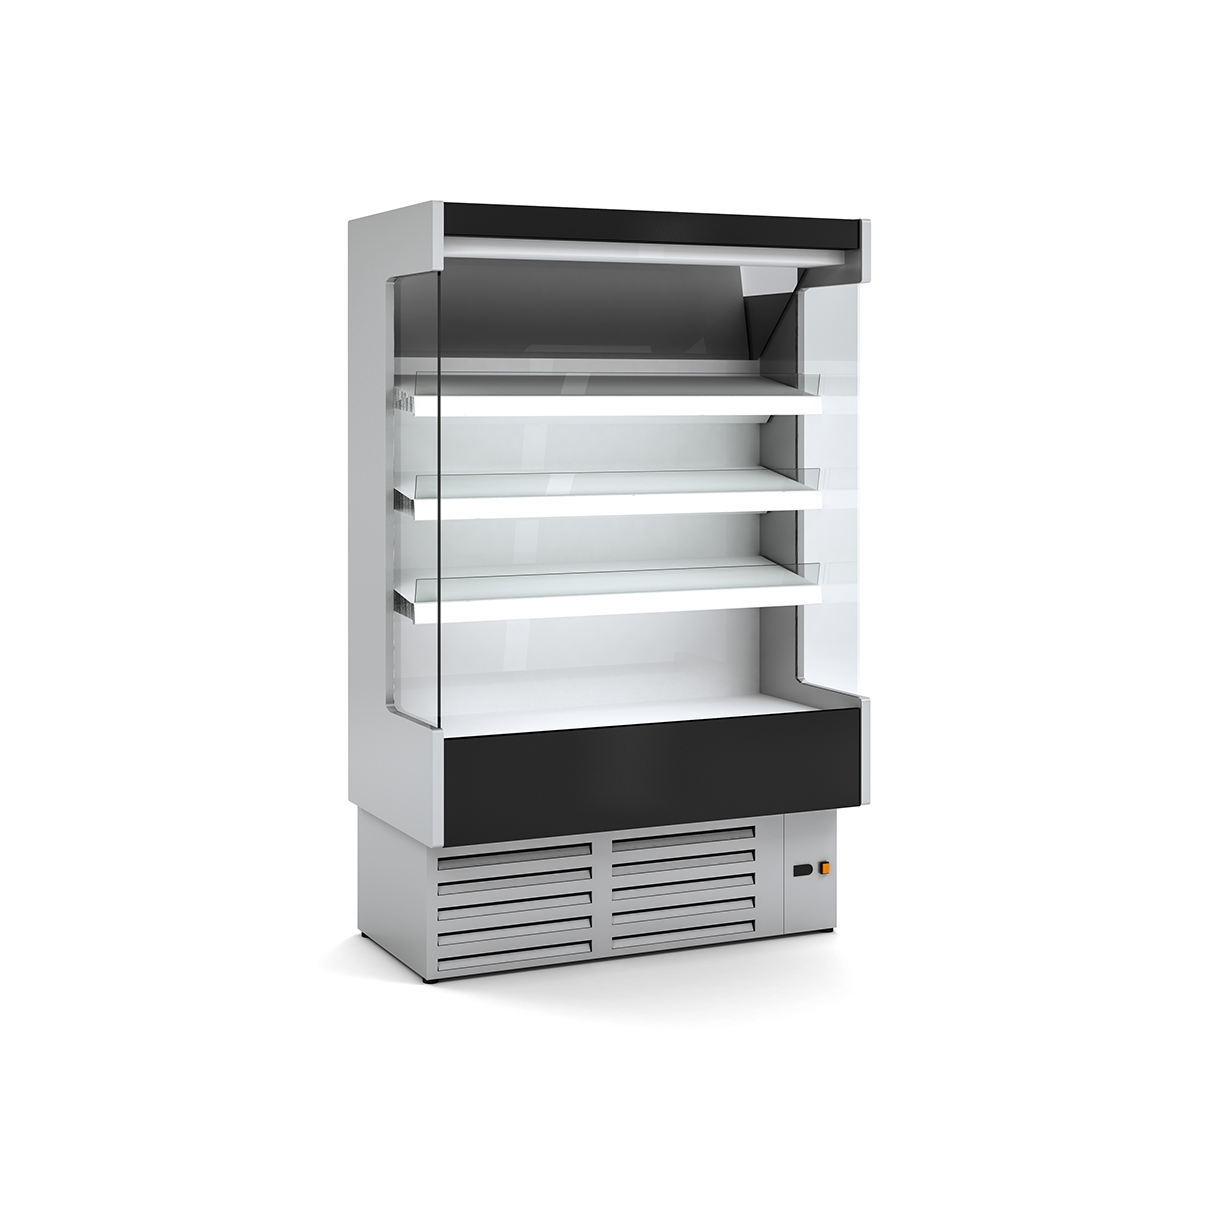 REFRIGERATED WALL CABINET DS0 H1